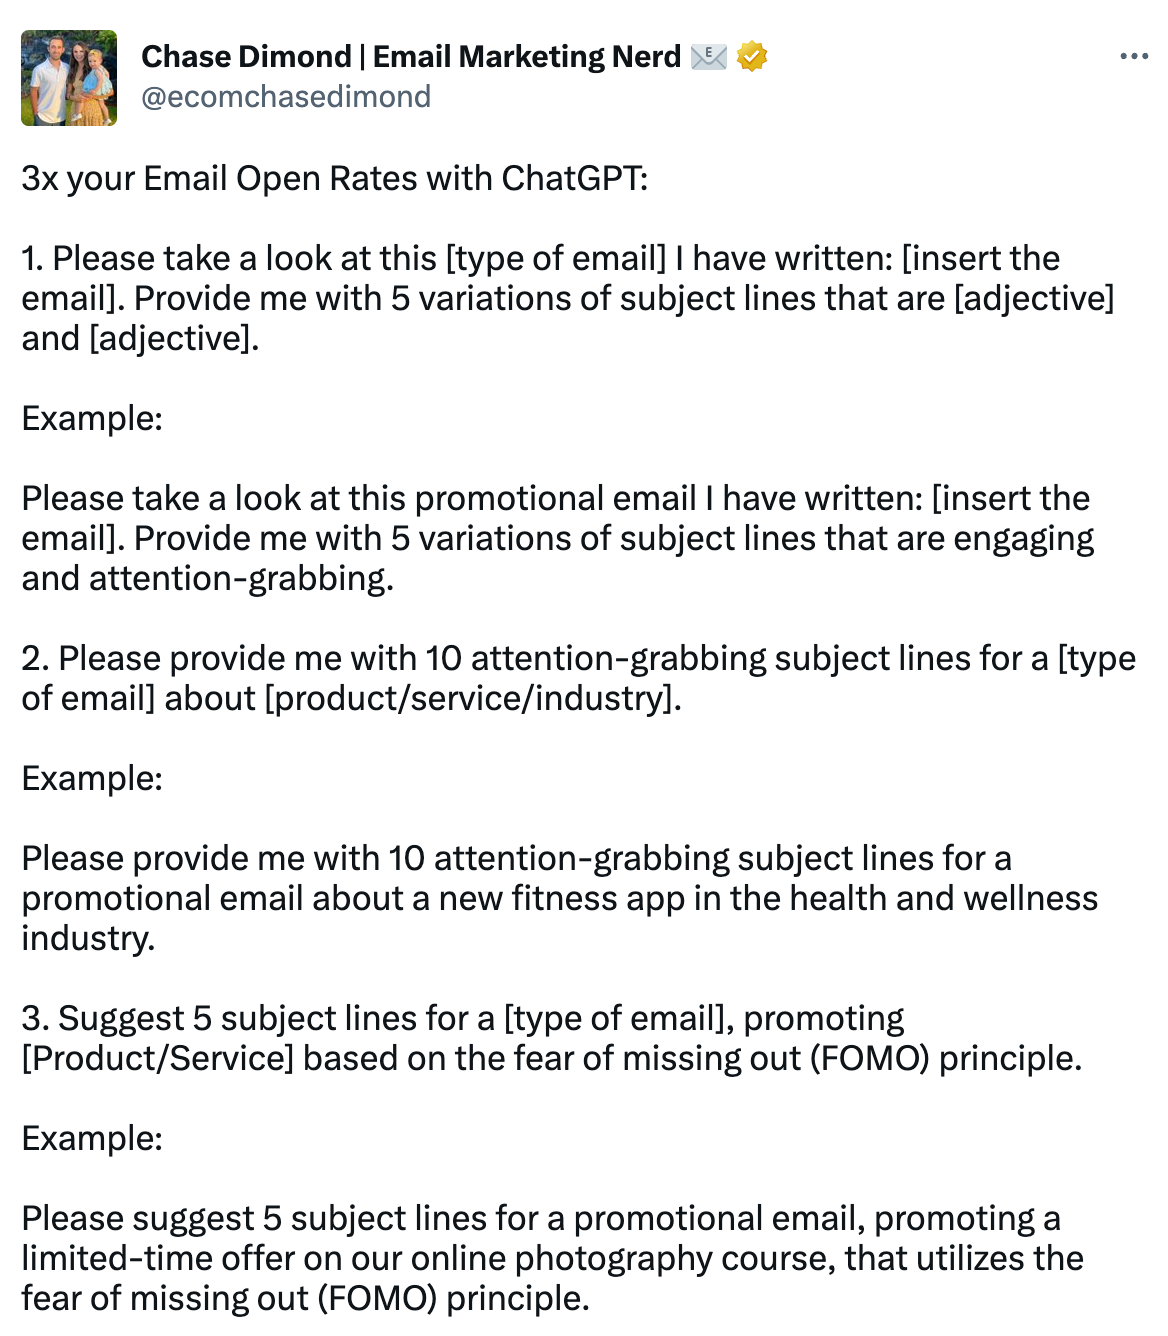 3x your Email Open Rates with ChatGPT